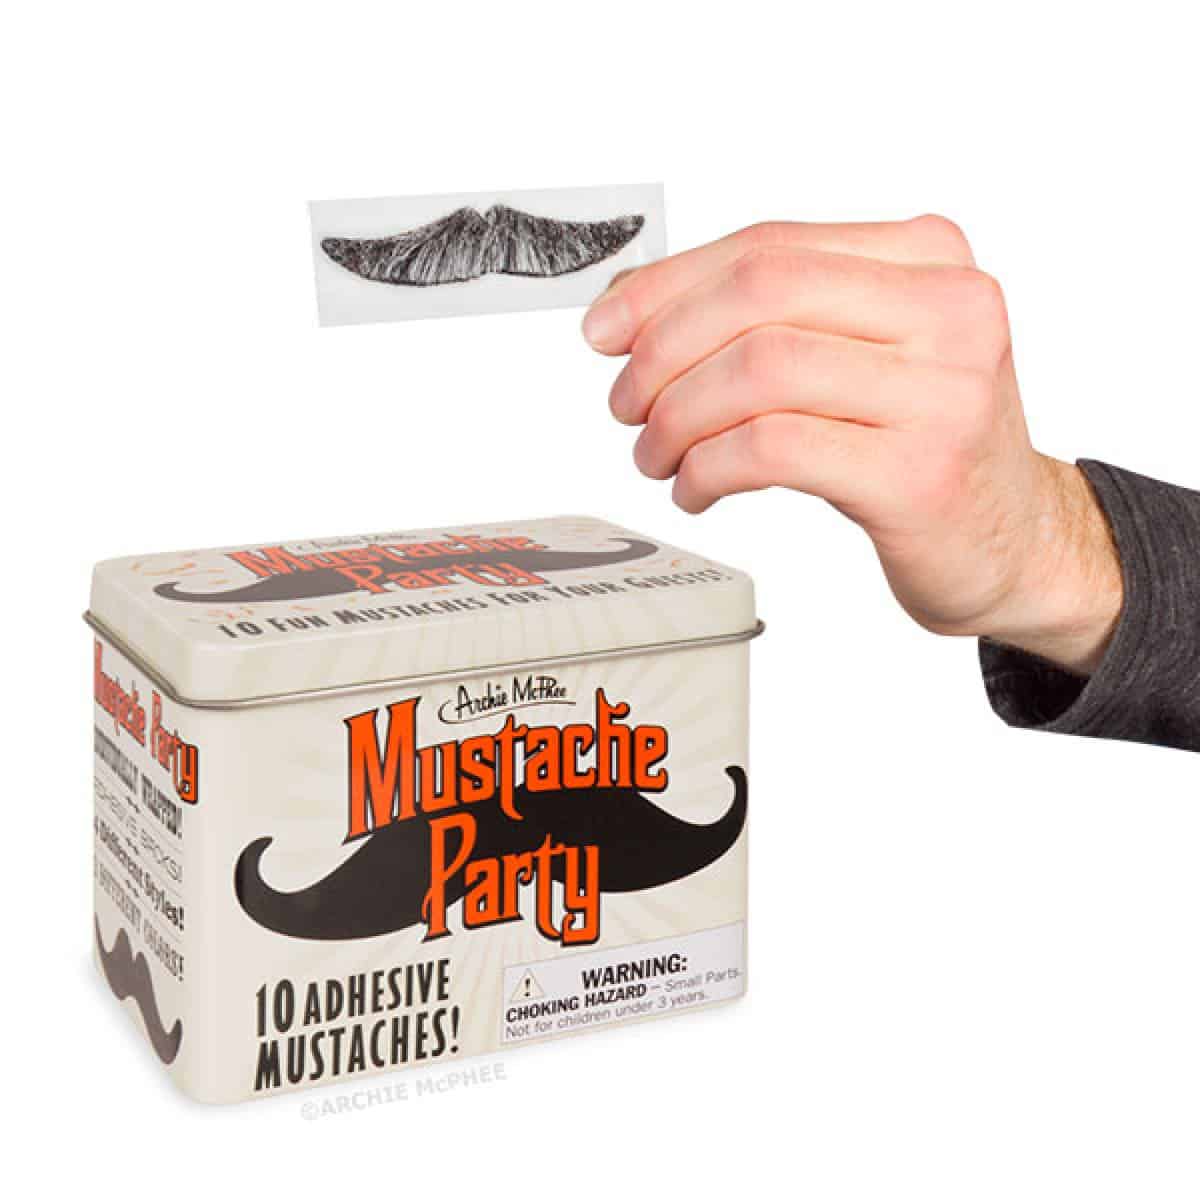 Mustache Party Sample